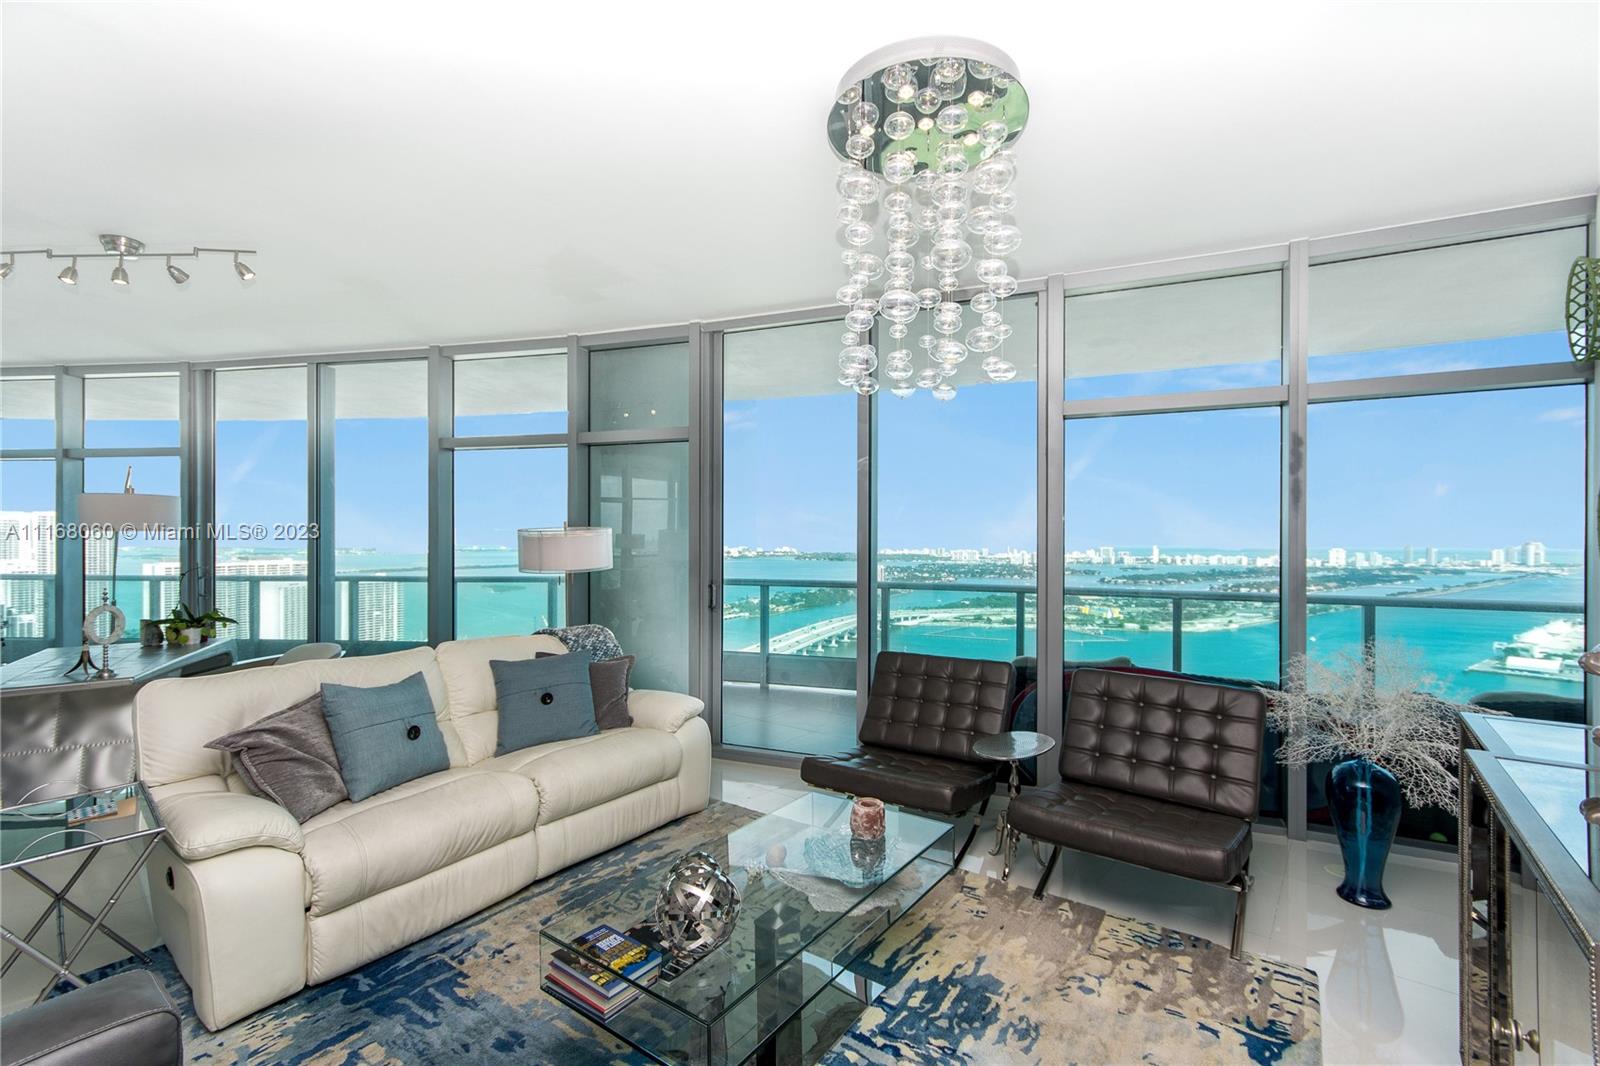 Unobstructed NE Biscayne Bay & city views overlooking Performing Arts Center. HIGH FLOOR HUGE 3 bedroom, 4 bath Corner unit with 24 x 24 white porcelain flooring throughout the unit and terraces. Kitchen W/ Carrara Marble counter tops, Dark Wenge Italian cabinetry, Miele and SubZero Ref. Private elevator & Foyer plus separate service entrance. 10' ceilings. Amenities include 2 pools overlooking the bay, gym, spa, private movie theater, kidz room, 24 hr security, concierge.